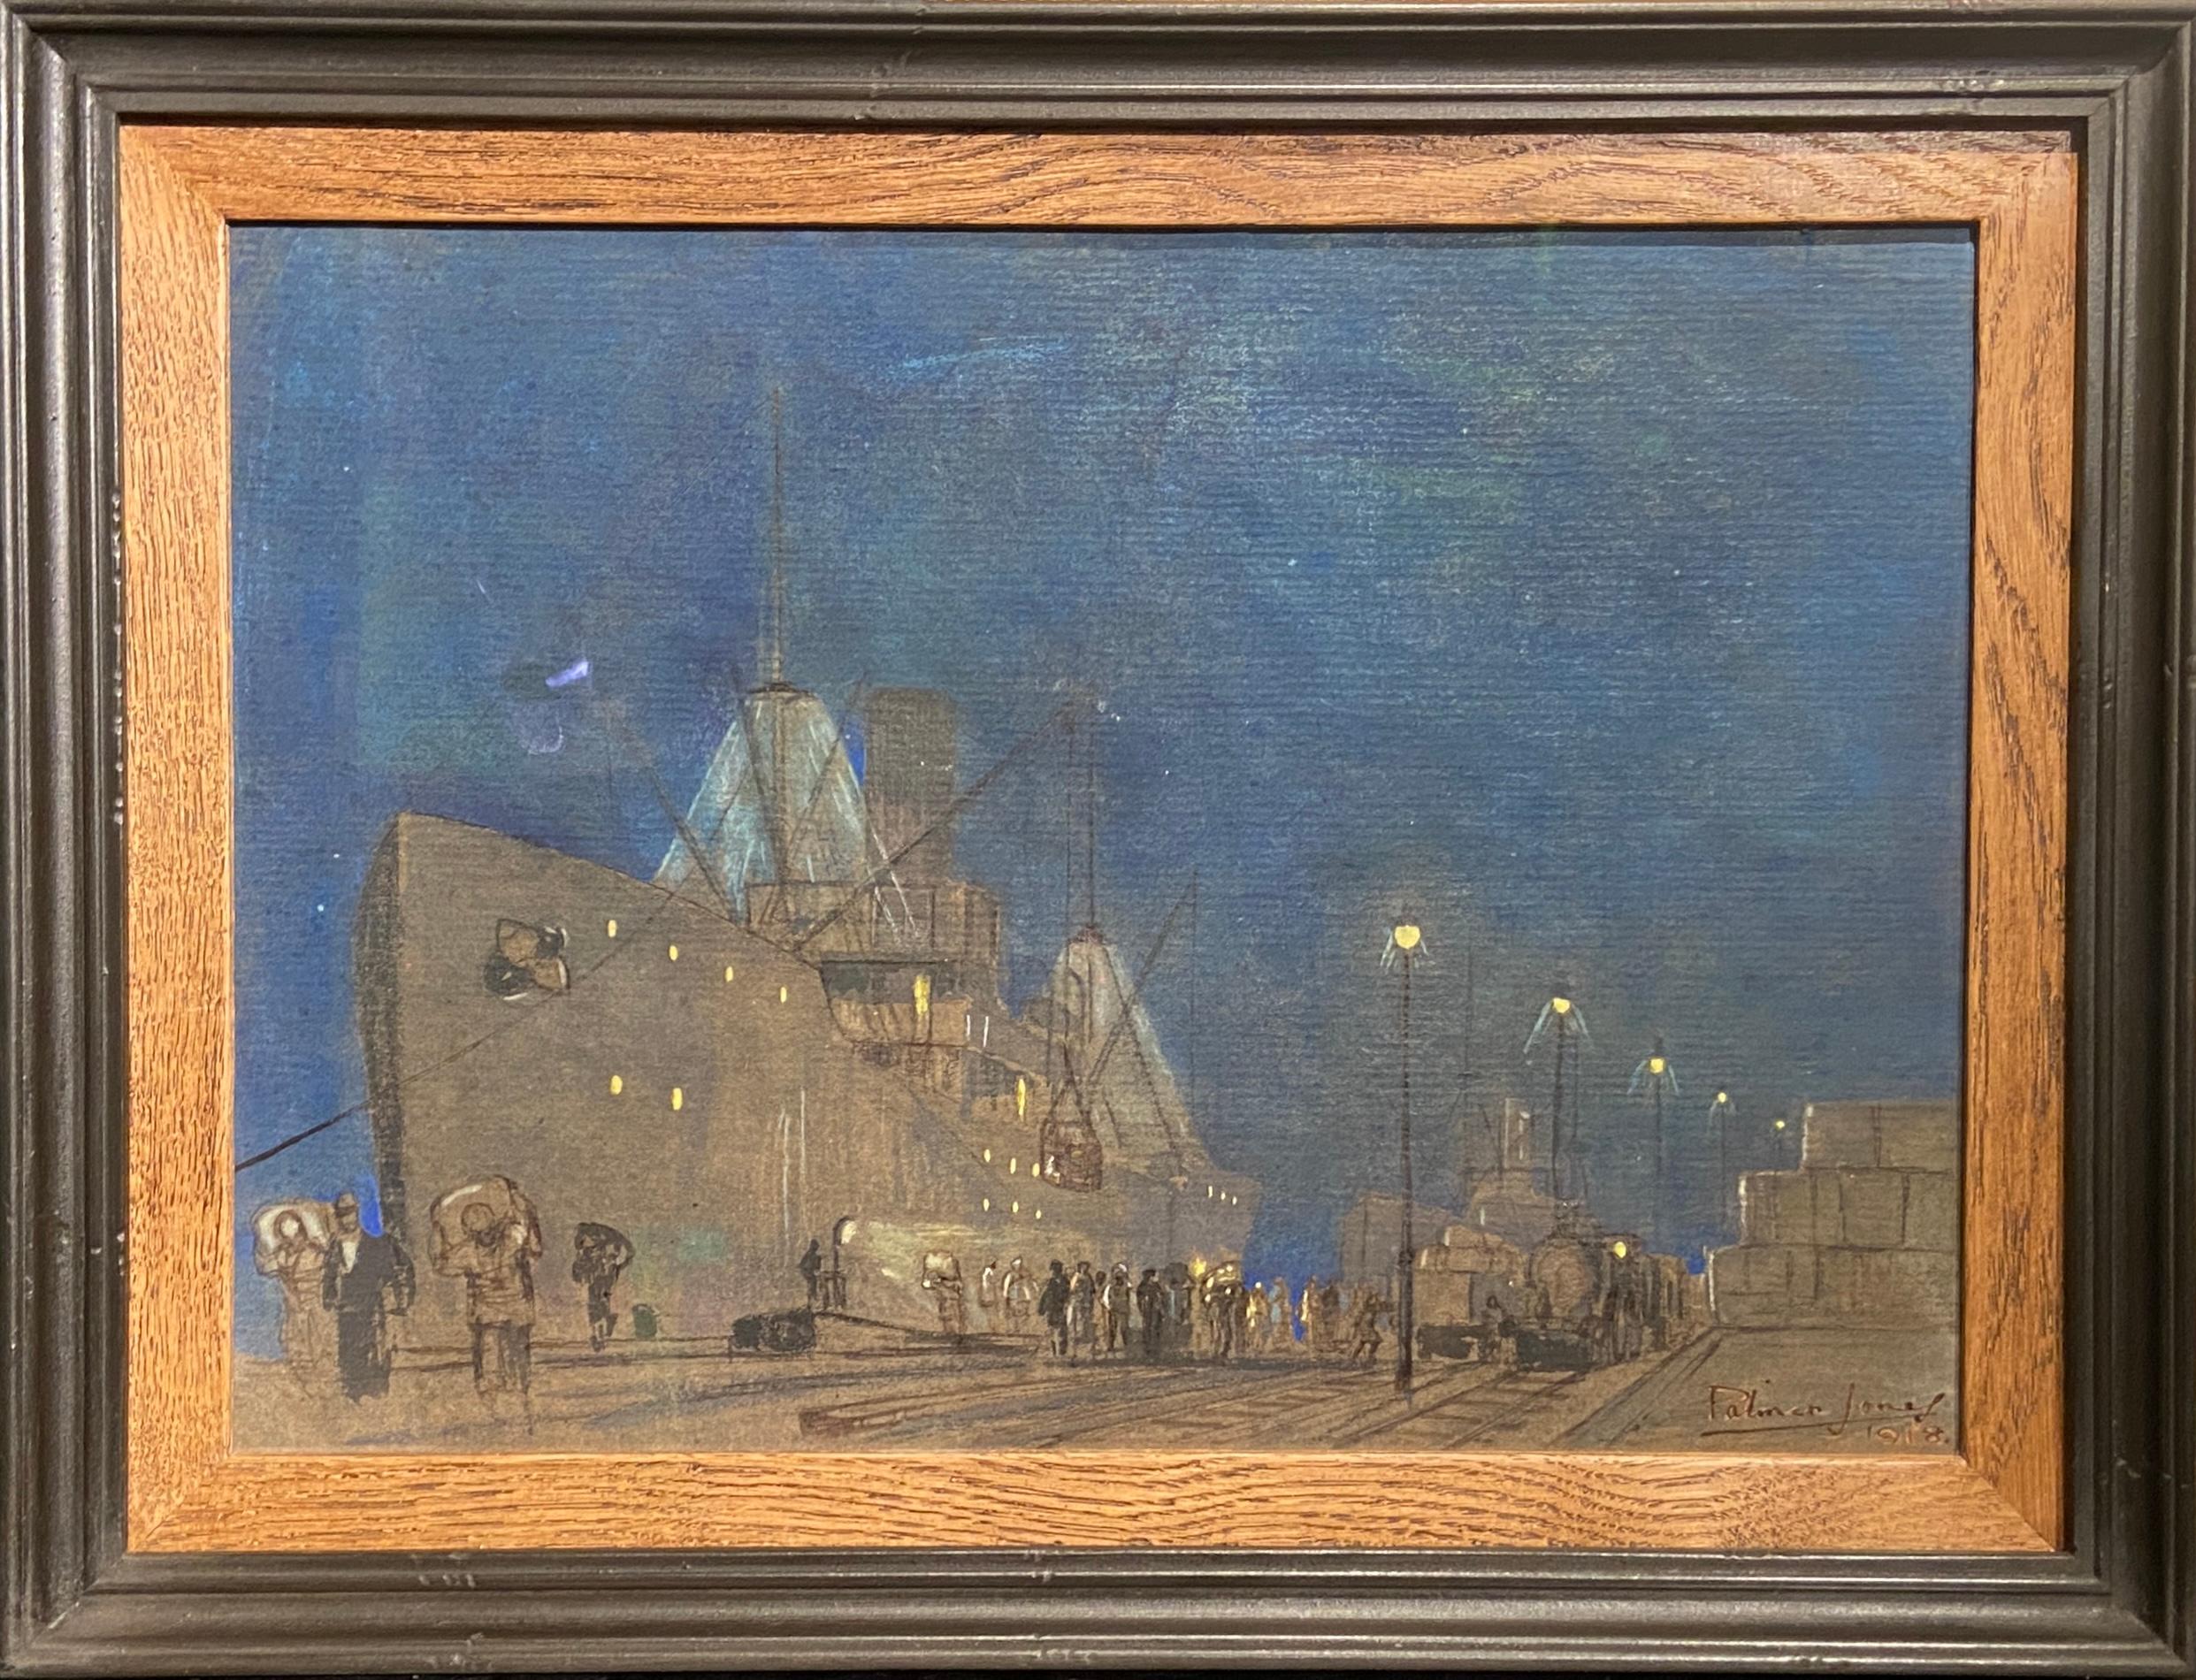 Watercolour and graphite on paper, signed and dated '1918' bottom right
Image size: 9 3/4 x 13 3/4 inches (25 x 35 cm)
Contemporary style hand made frame


Provenance
London Private Collection


This dock scene, featuring figures loading a cargo